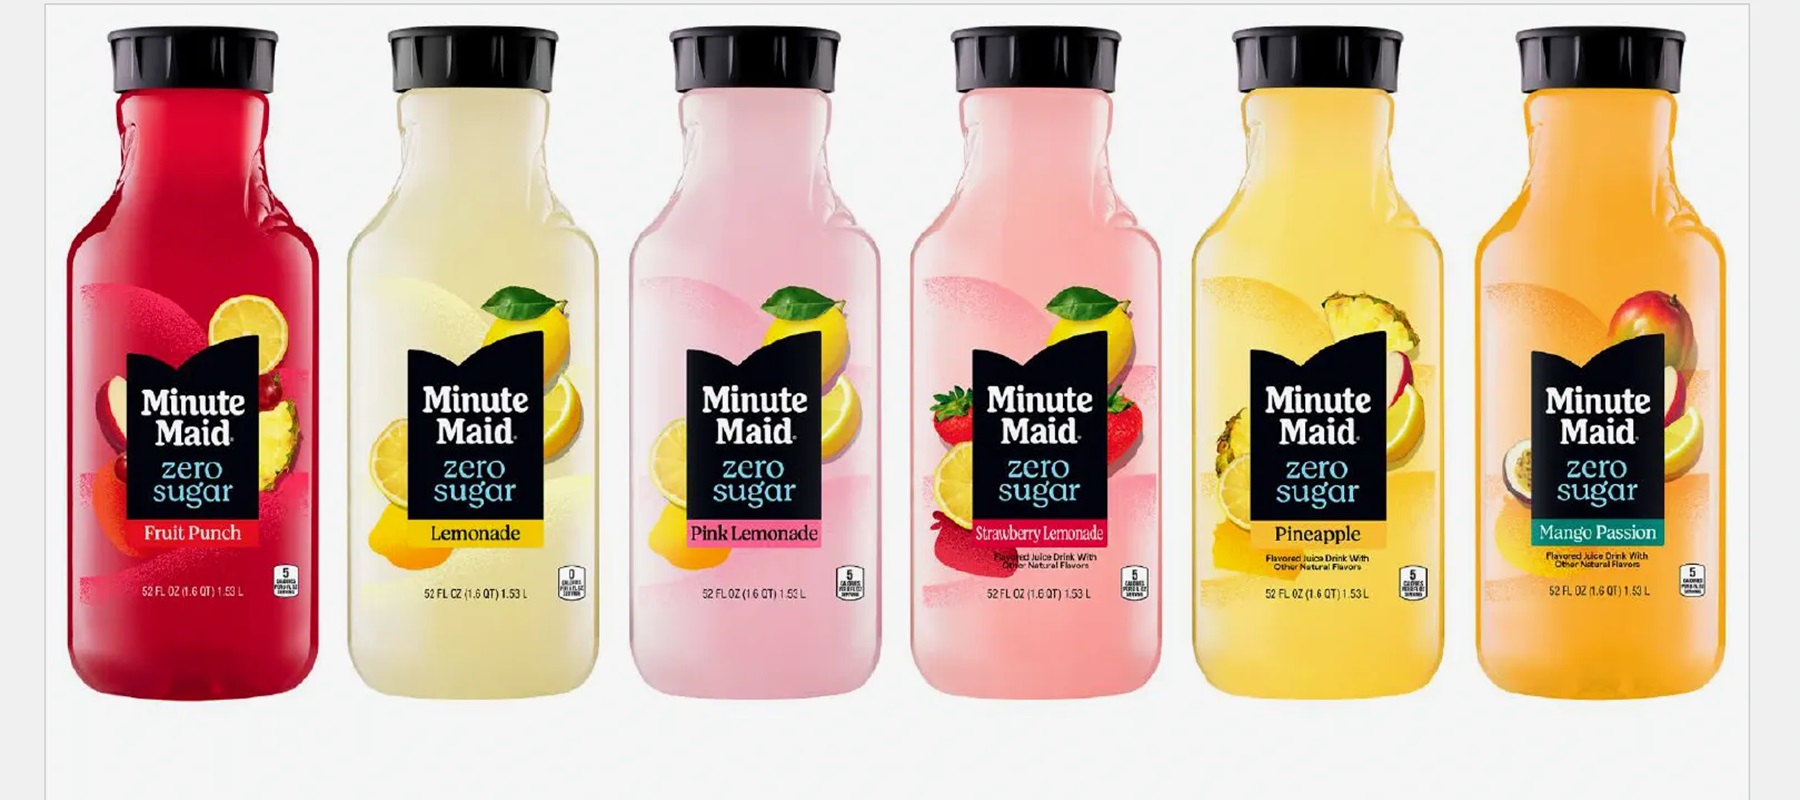 Minute Maid launches global campaign to show how the brand ‘sells itself’